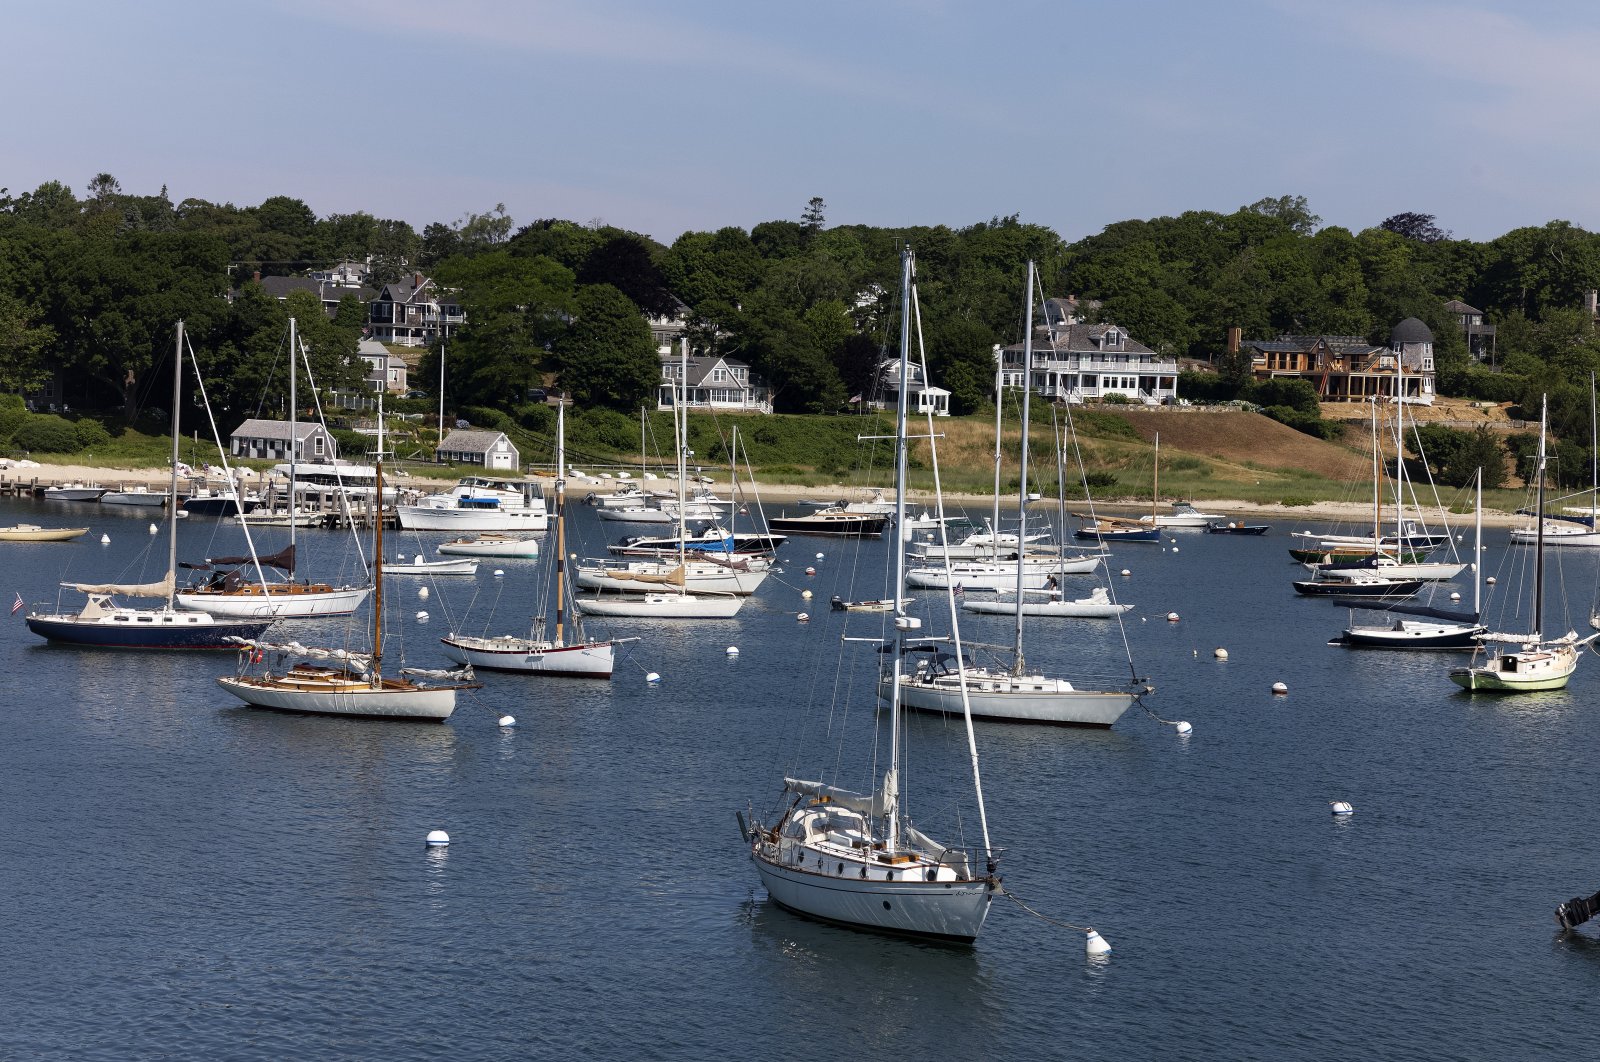 Sailboats and motorboats are anchored in Vineyard Haven harbor, Sunday, June 28, 2020 in Tisbury, Mass. on the island of Martha's Vineyard. (AP Photo/Mark Lennihan)